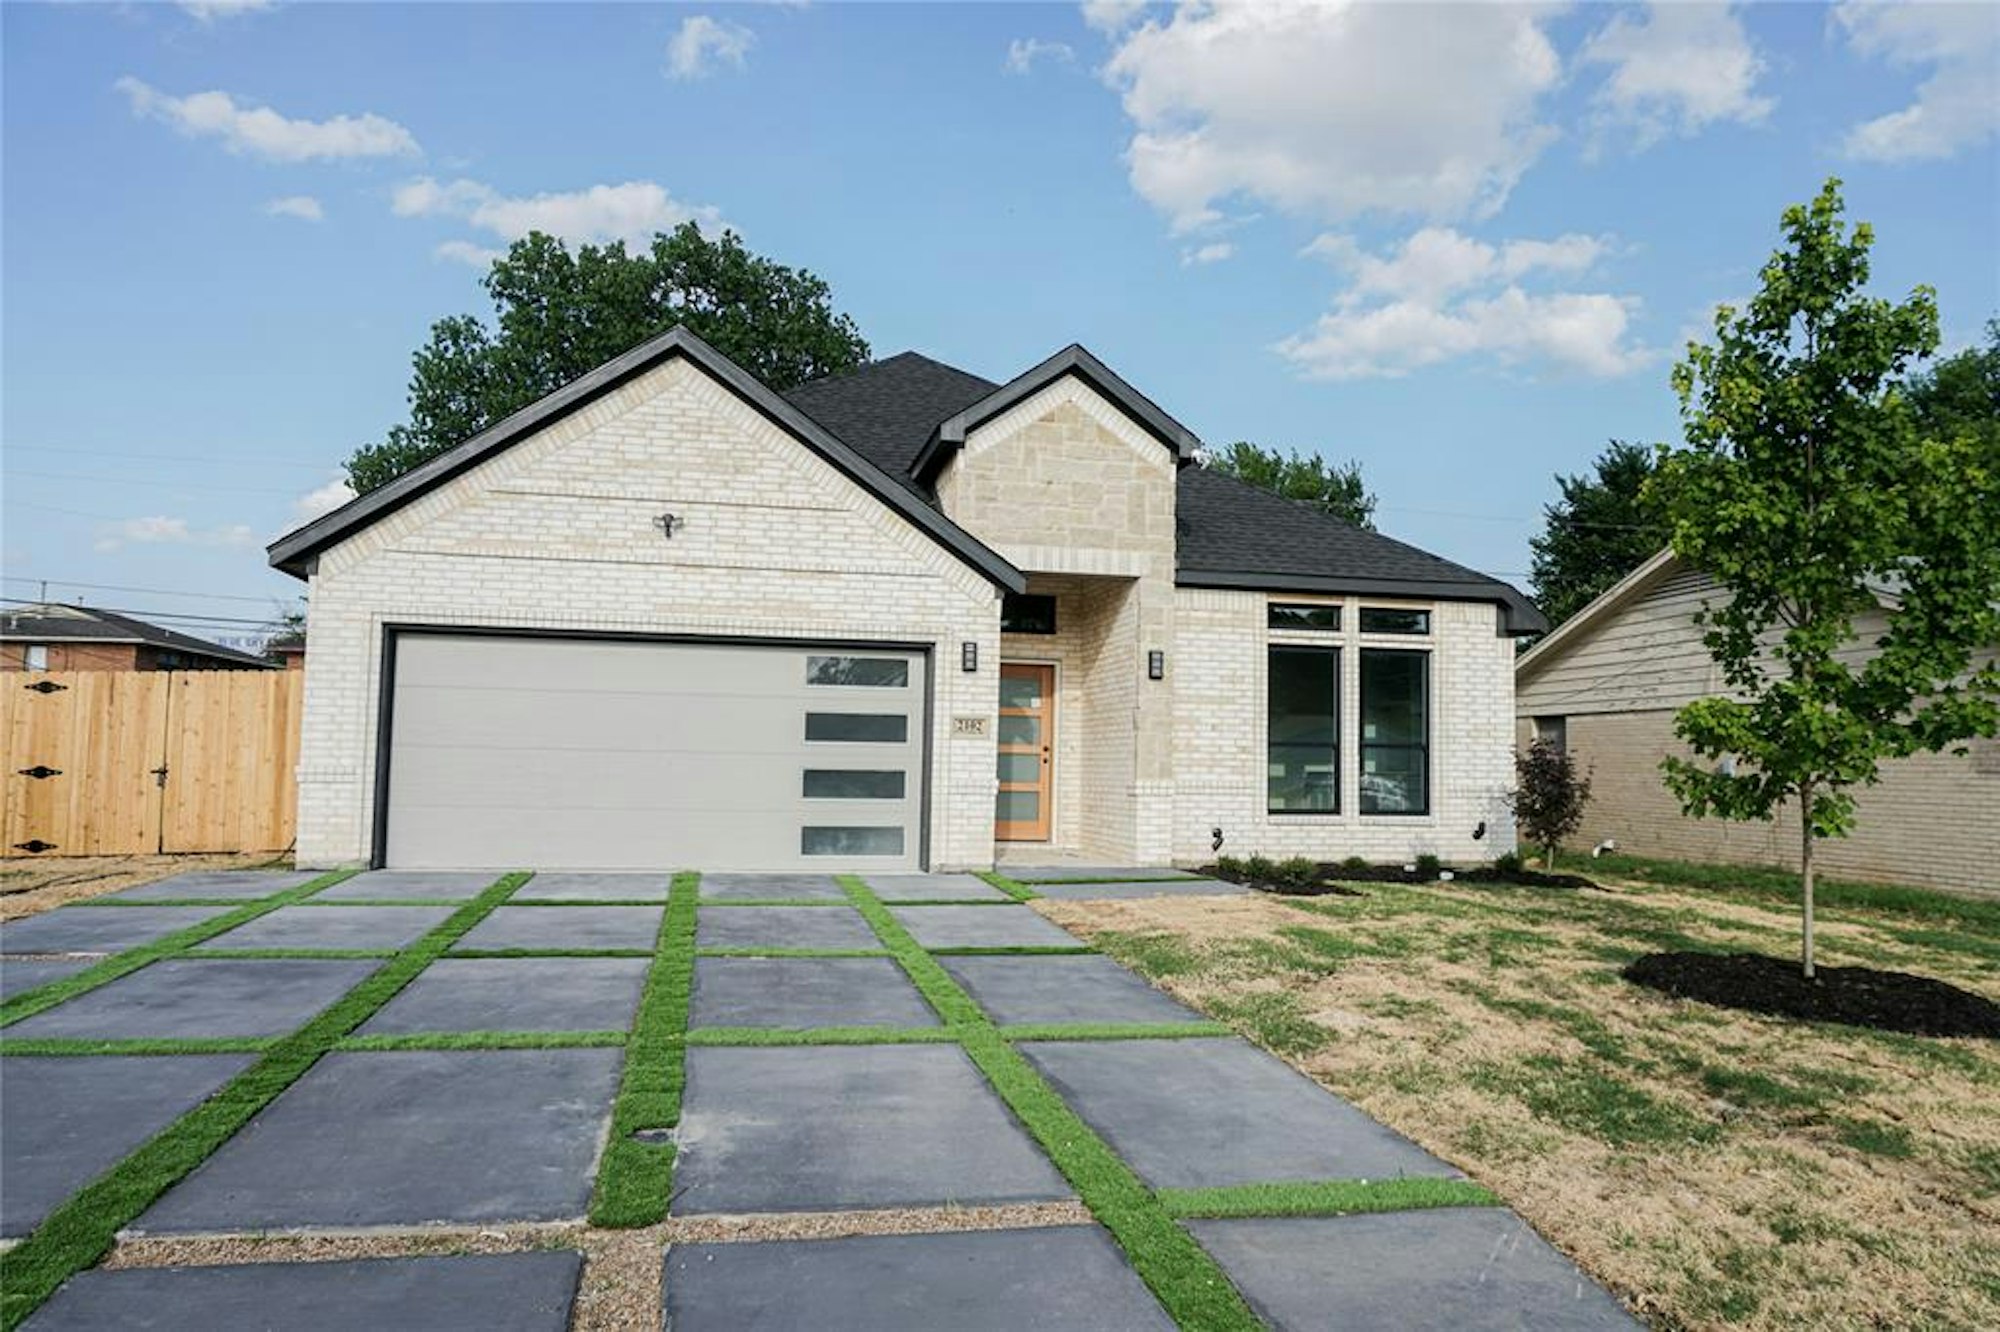 Photo 1 of 13 - 2102 N O Connor Rd, Irving, TX 75061